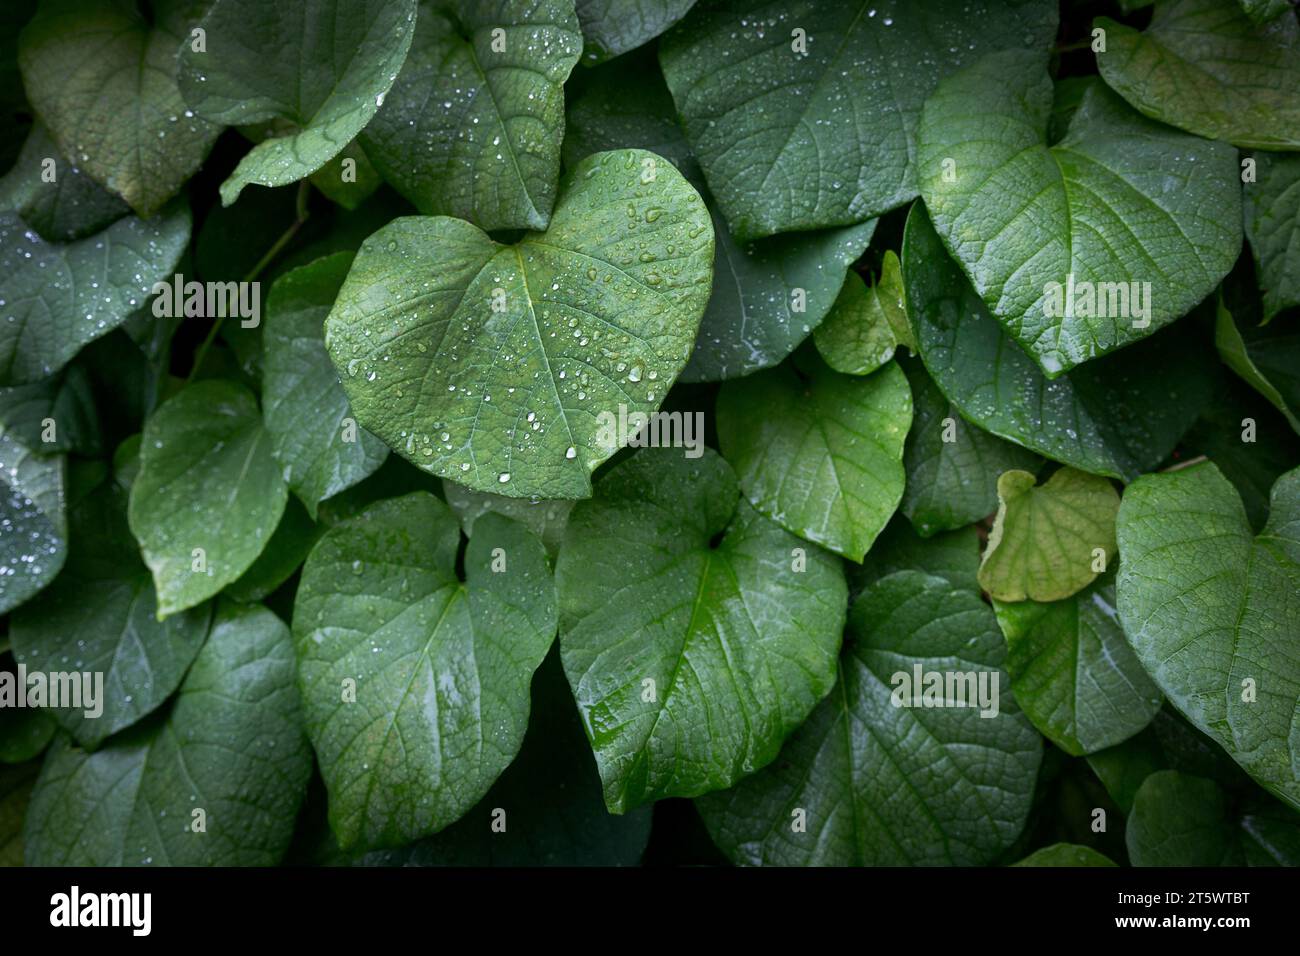 Green leaves with drops of rain, natural background Stock Photo